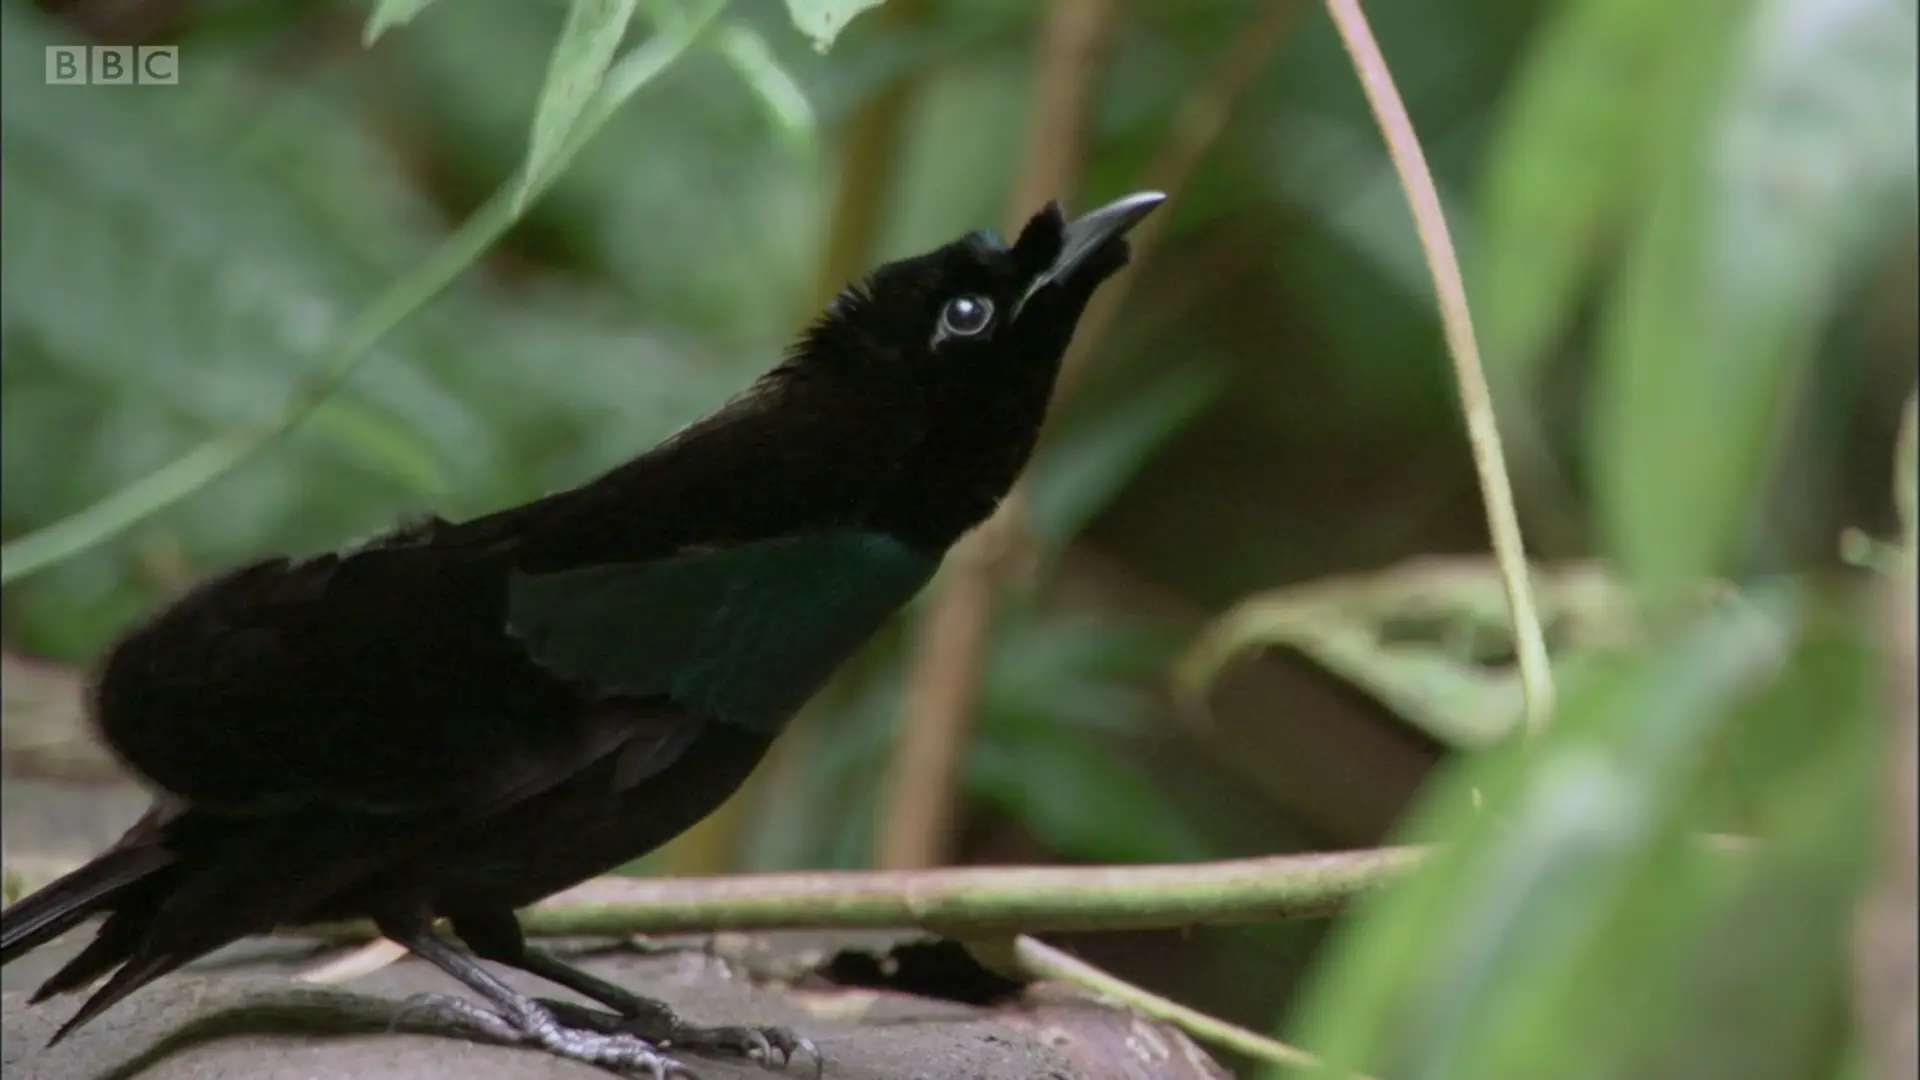 Greater superb bird-of-paradise (Lophorina superba) as shown in Planet Earth - From Pole to Pole